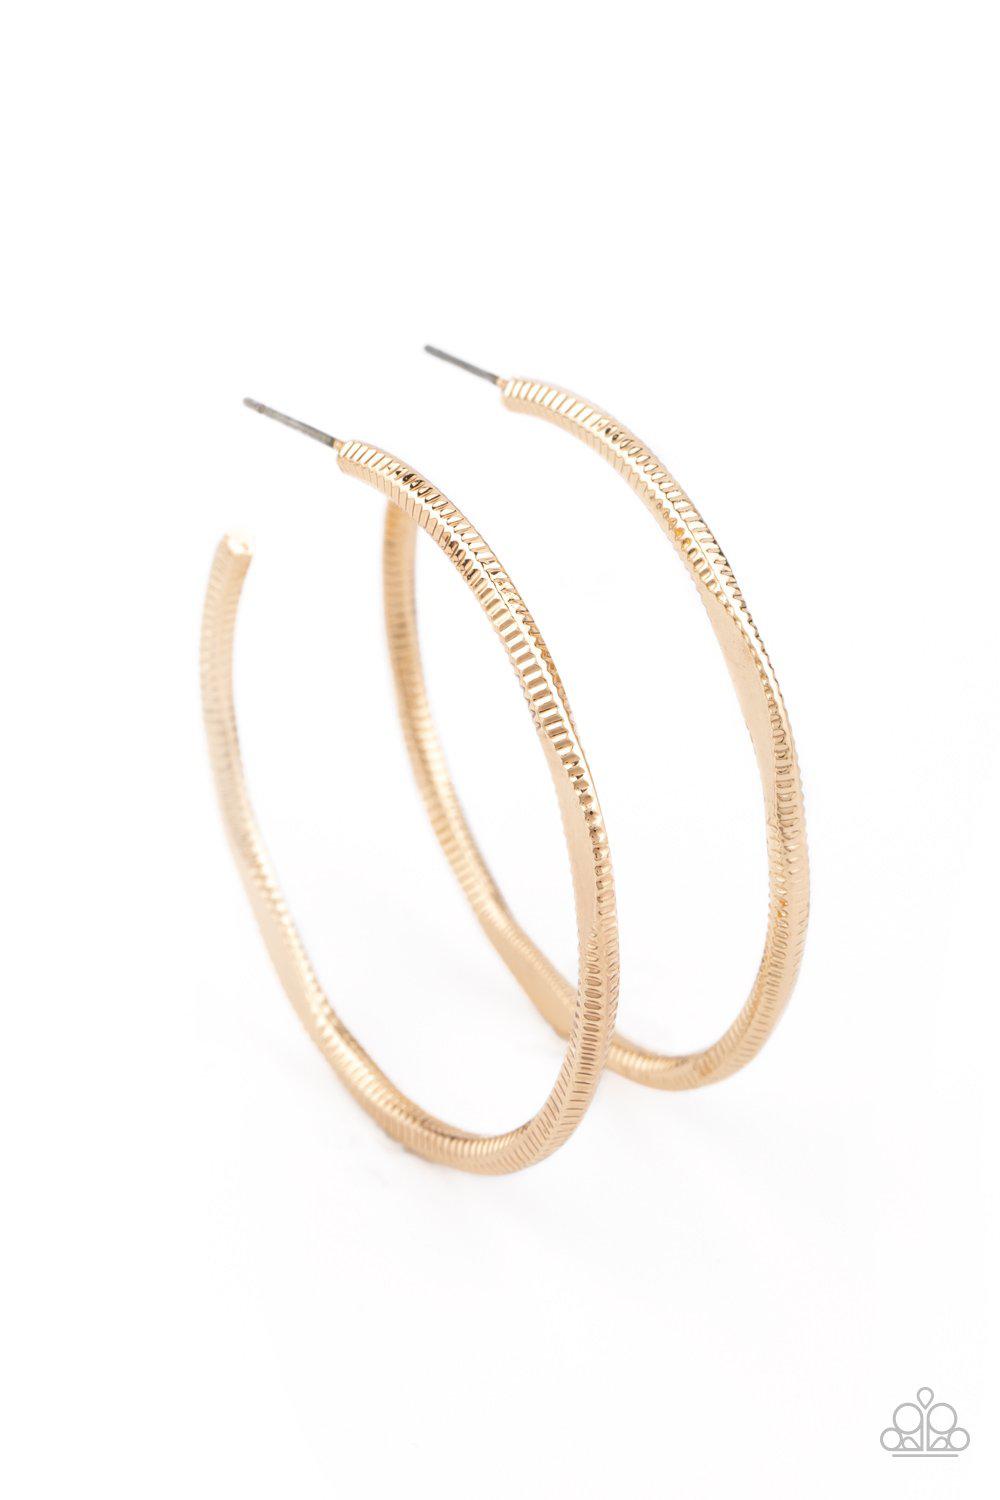 Spitfire Gold Hoop Earrings - Paparazzi Accessories-CarasShop.com - $5 Jewelry by Cara Jewels